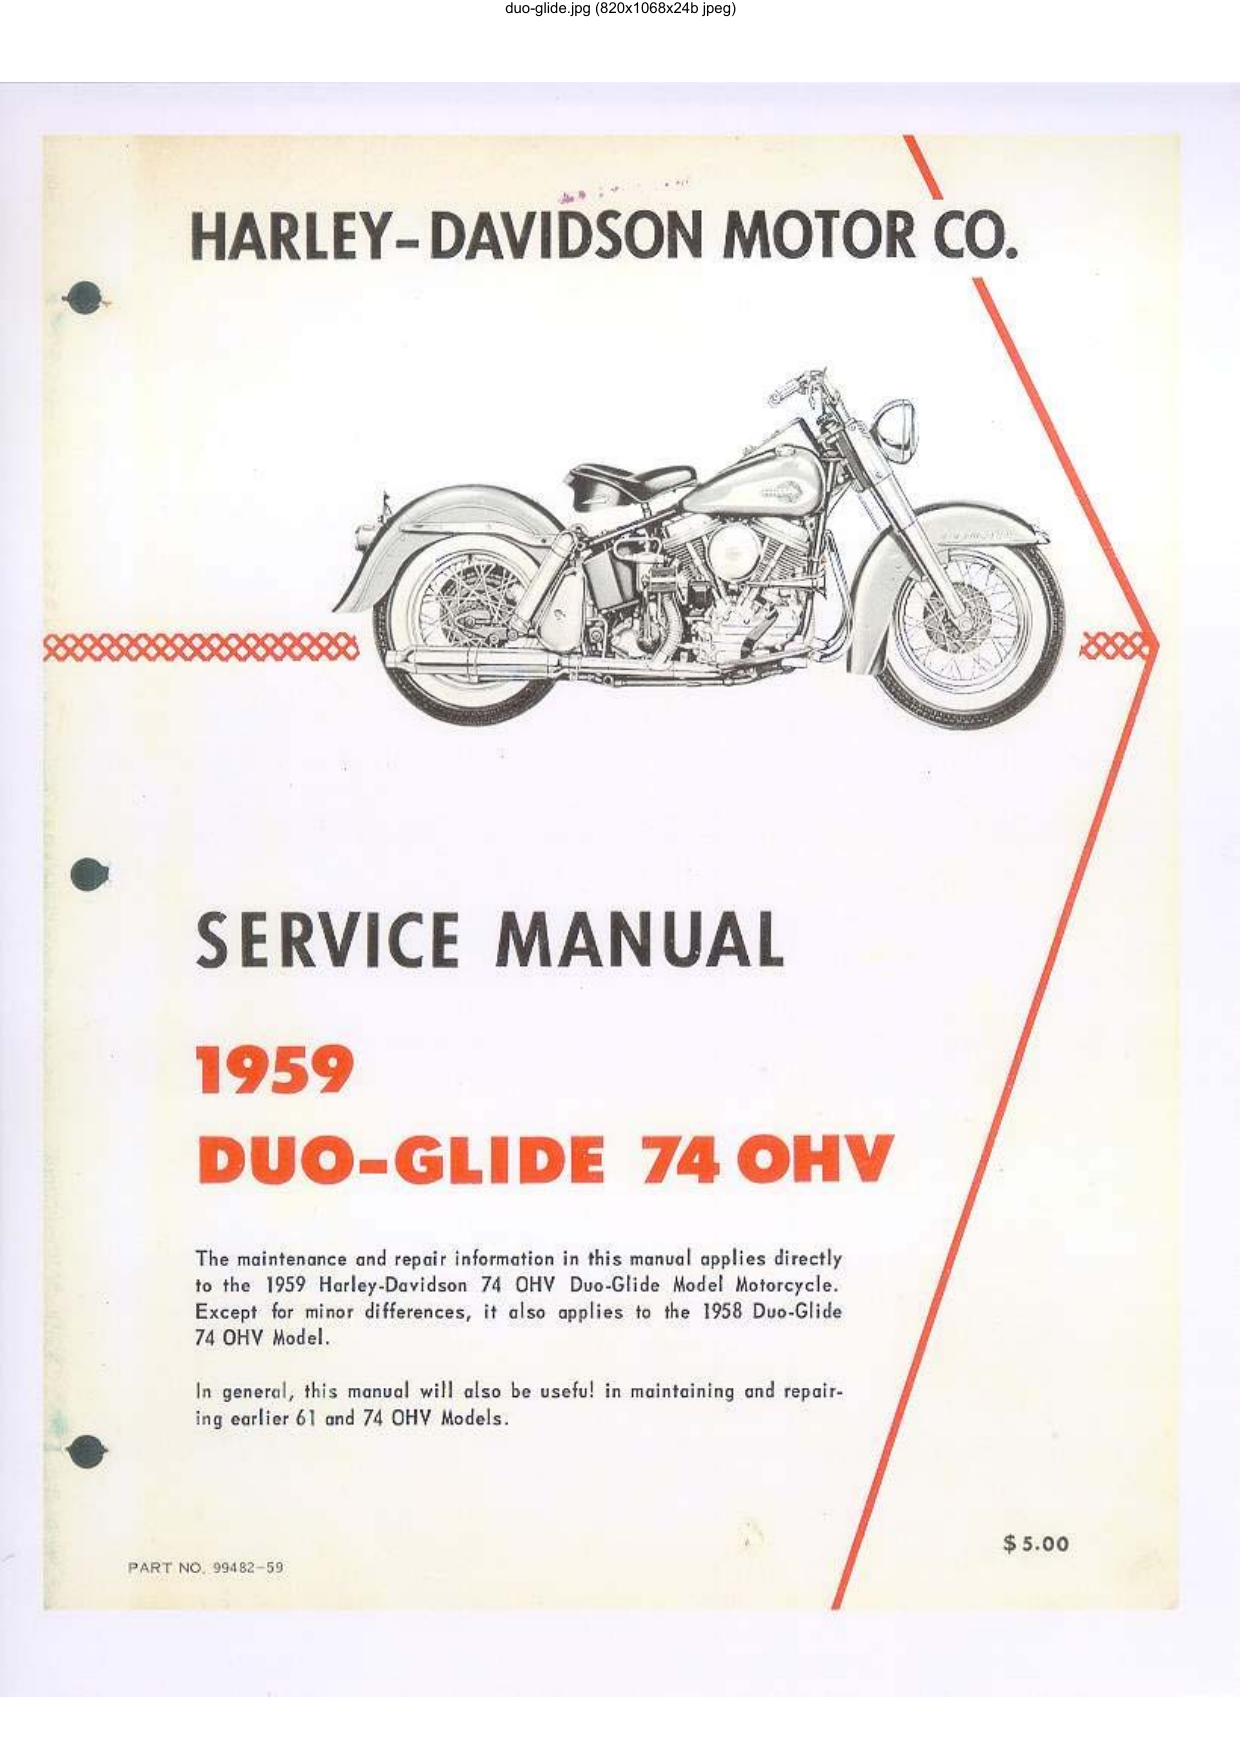 1959 Harley-Davidson Duo Glide 74 service manual Preview image 2